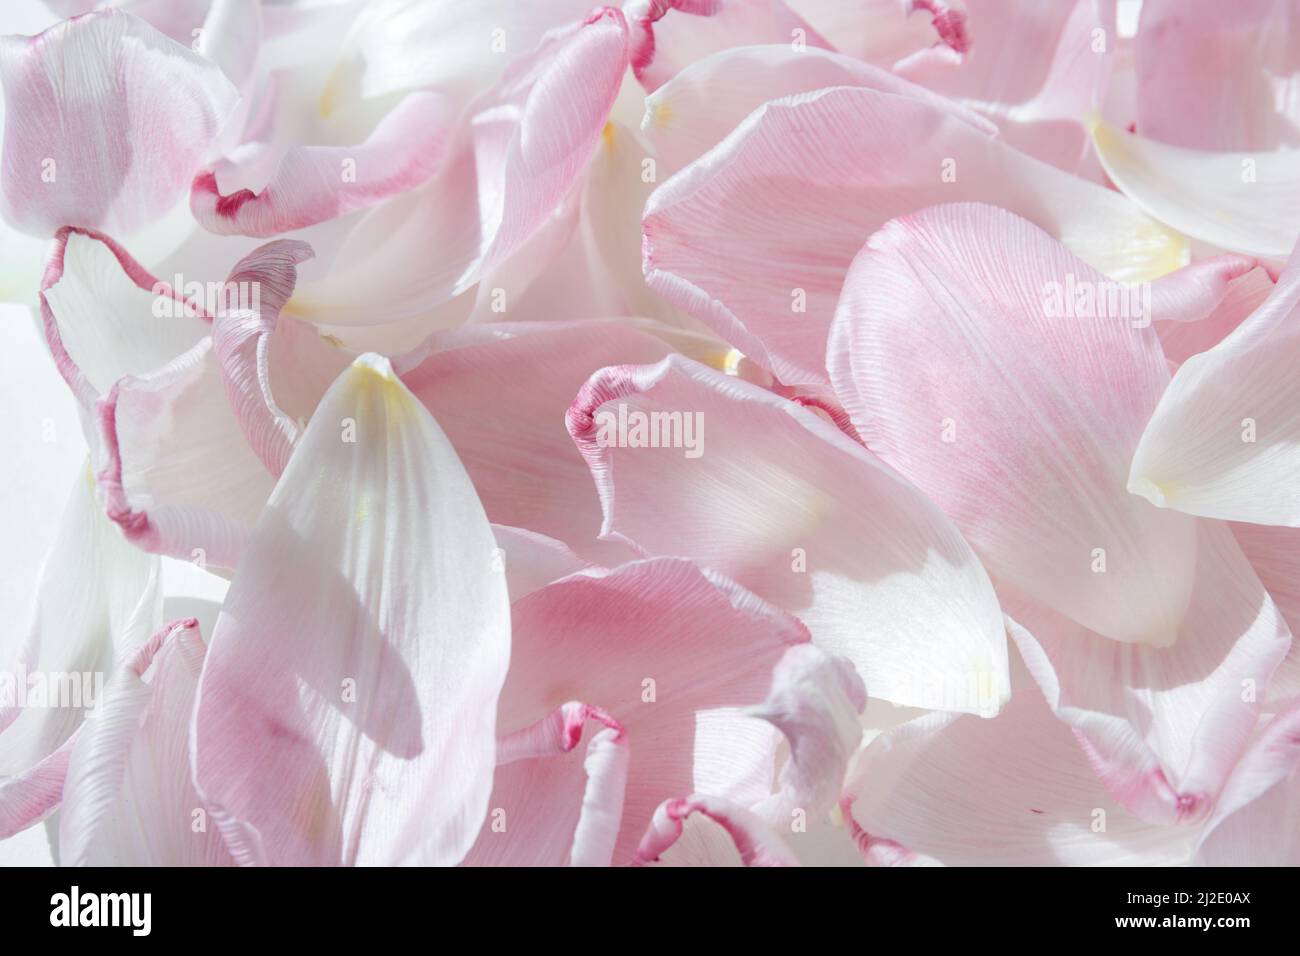 A tulip petal. Pink fallen tulip petals. Romantic gentle background. A symbol of fragility and tenderness Stock Photo